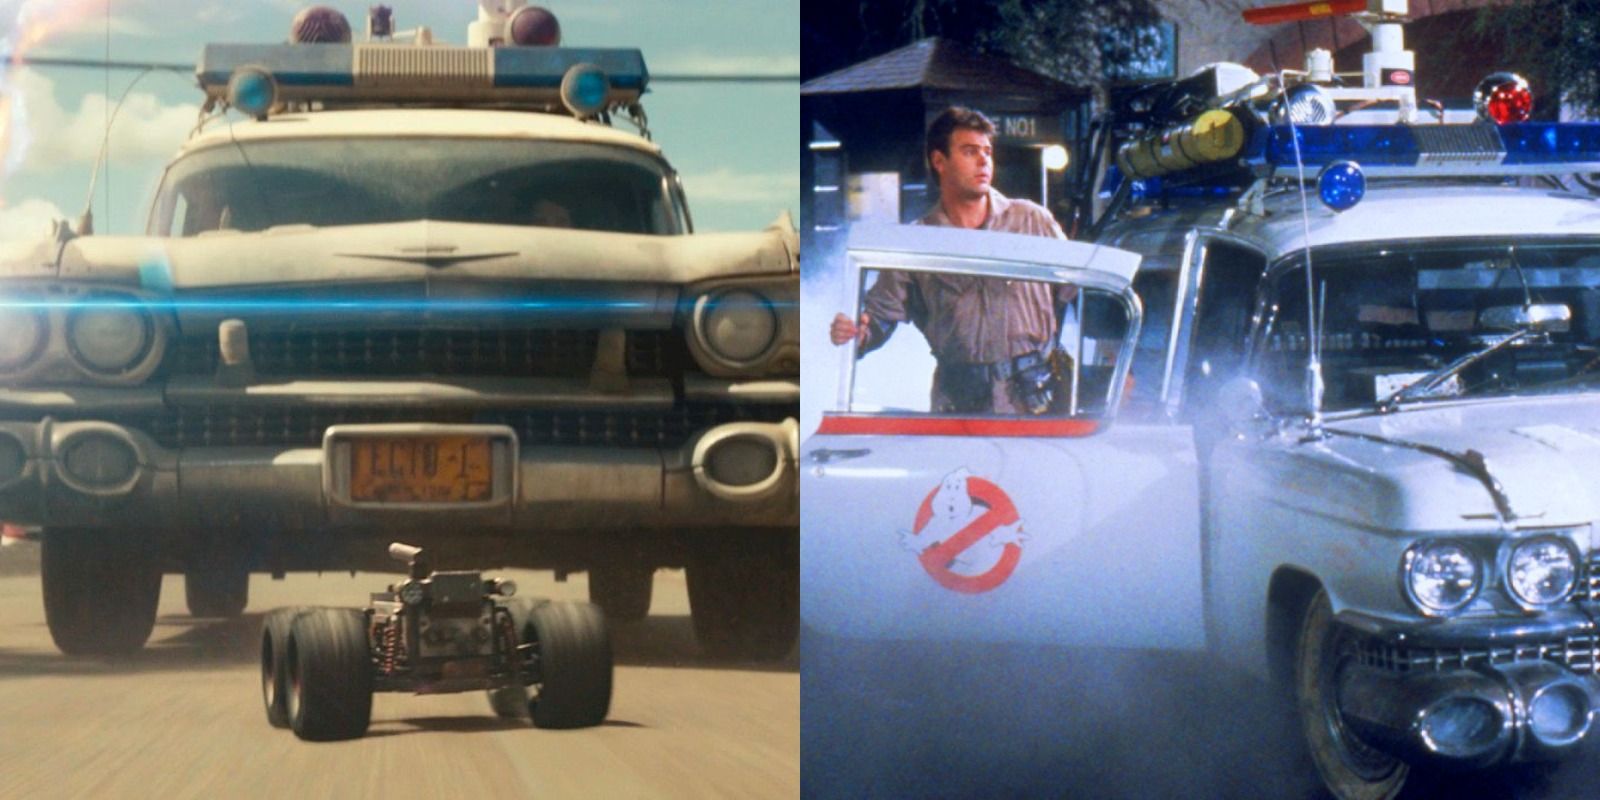 The famous Ghostbusters Ecto-1